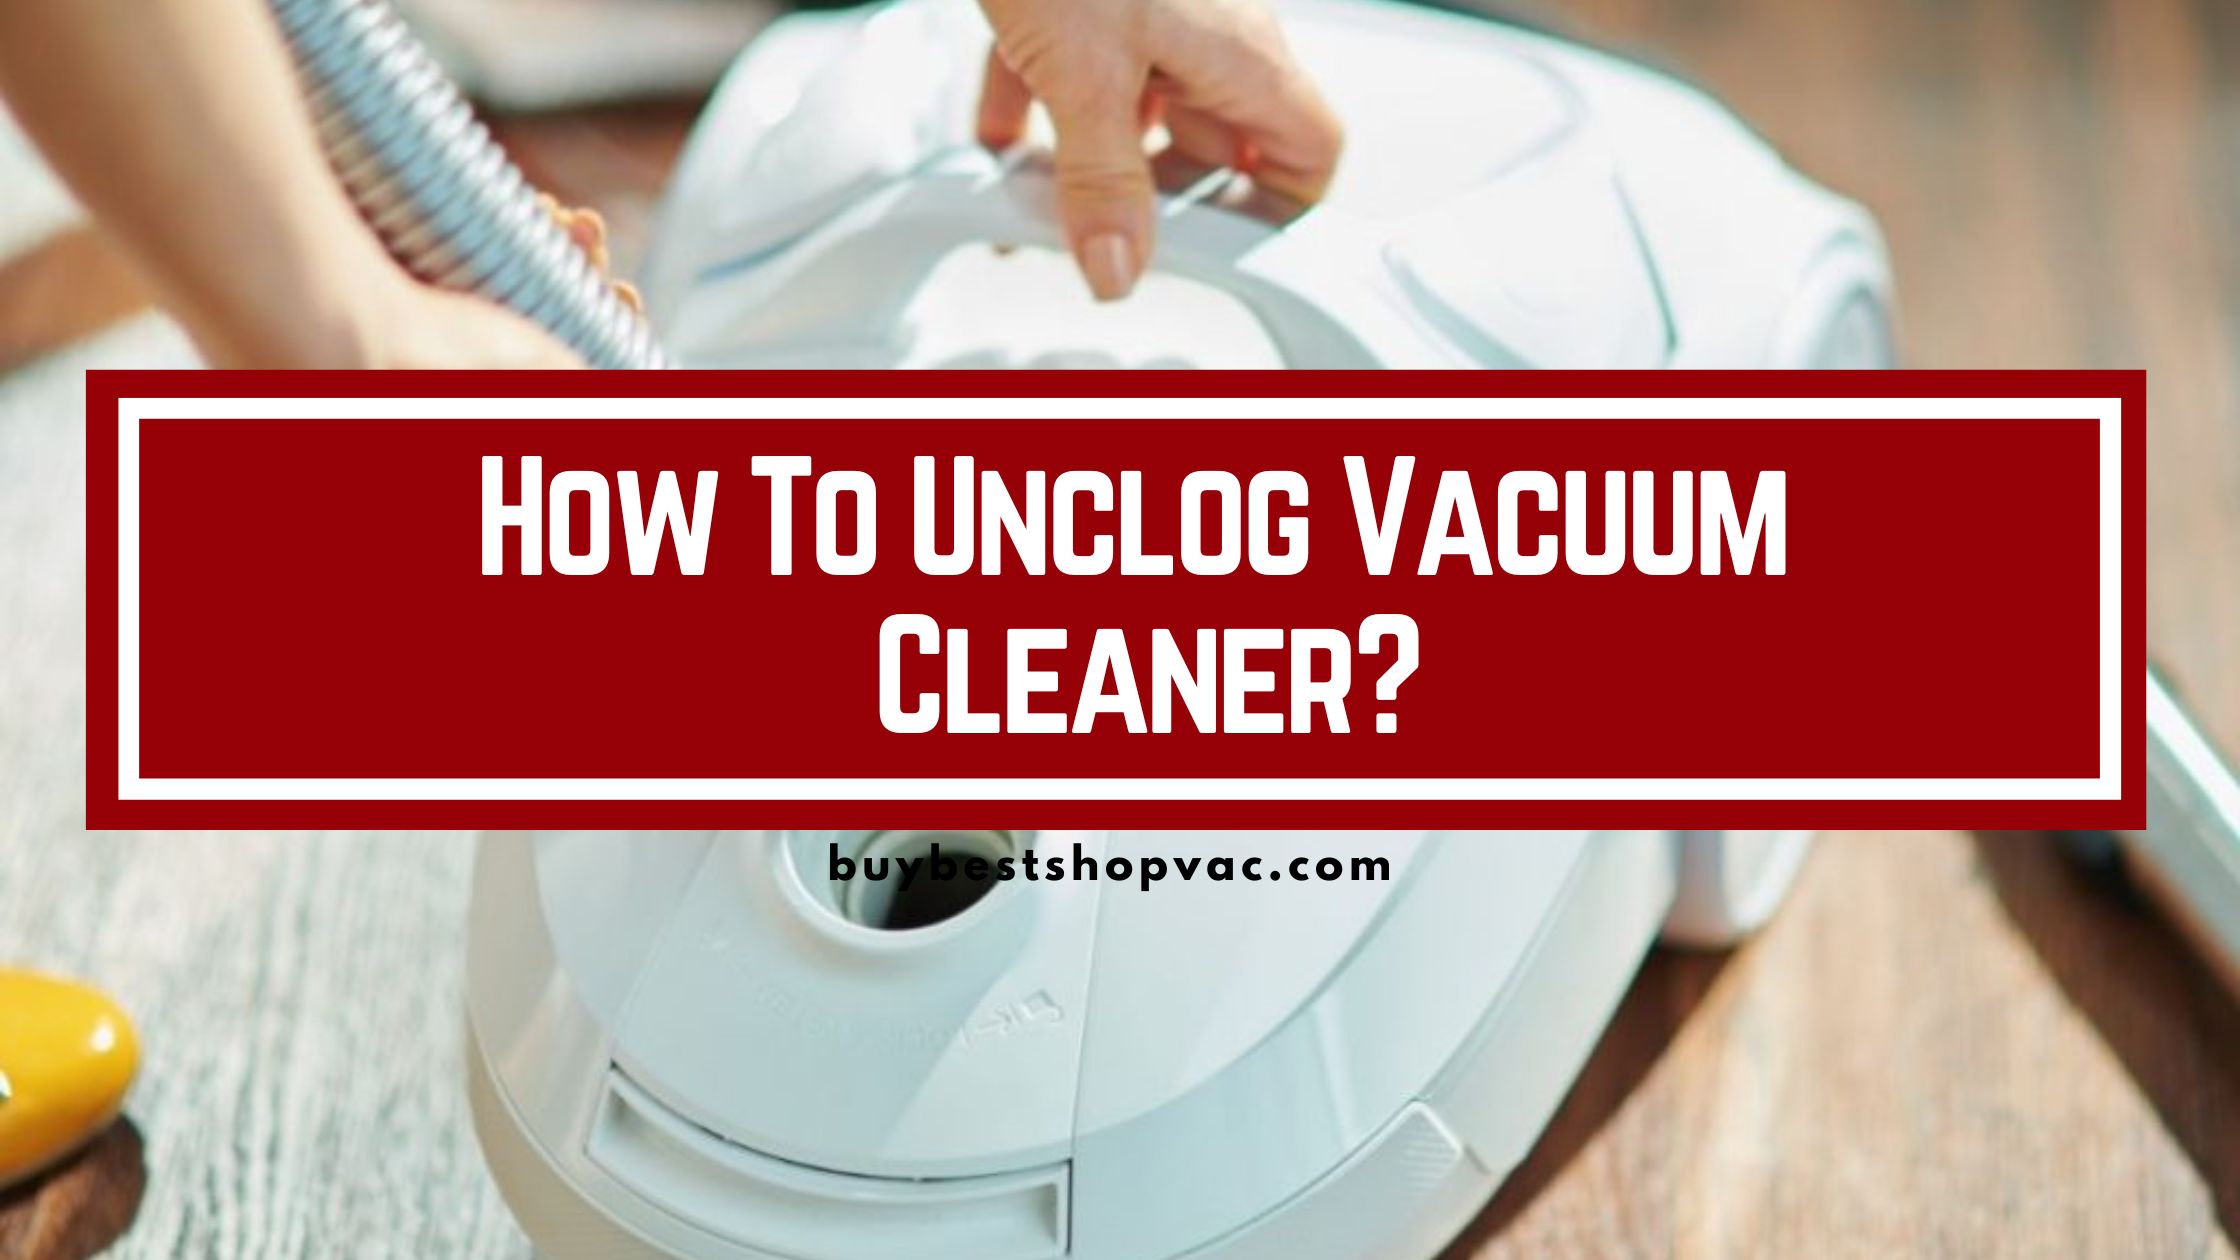 How To Unclog Vacuum Cleaner? (Complete Guide)